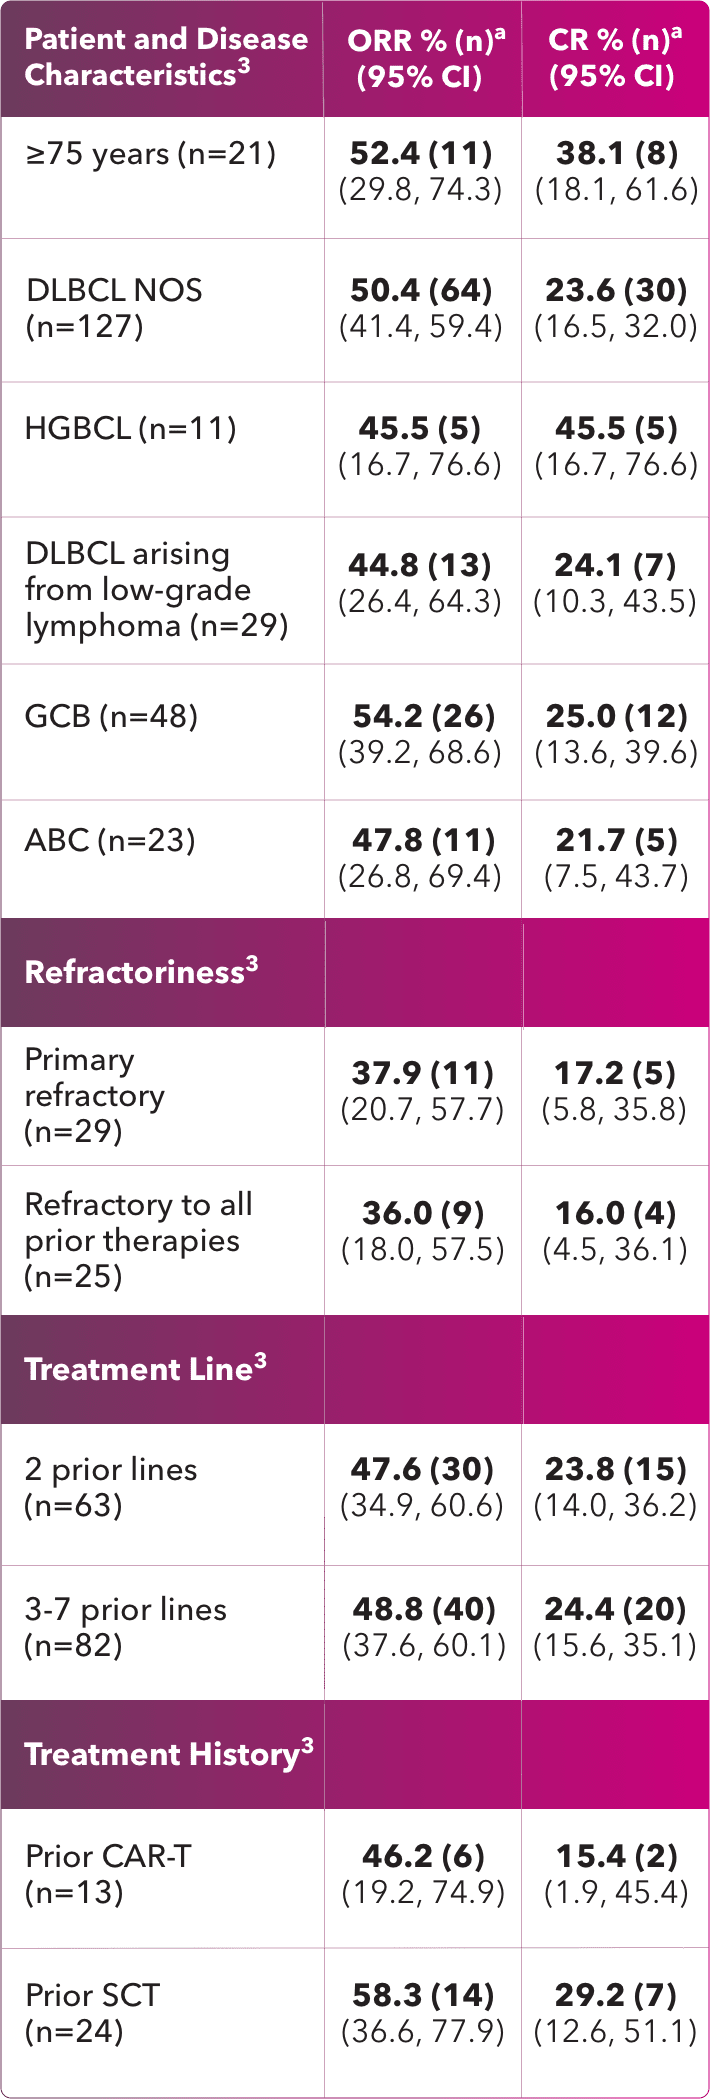 Response in select patient subgroups